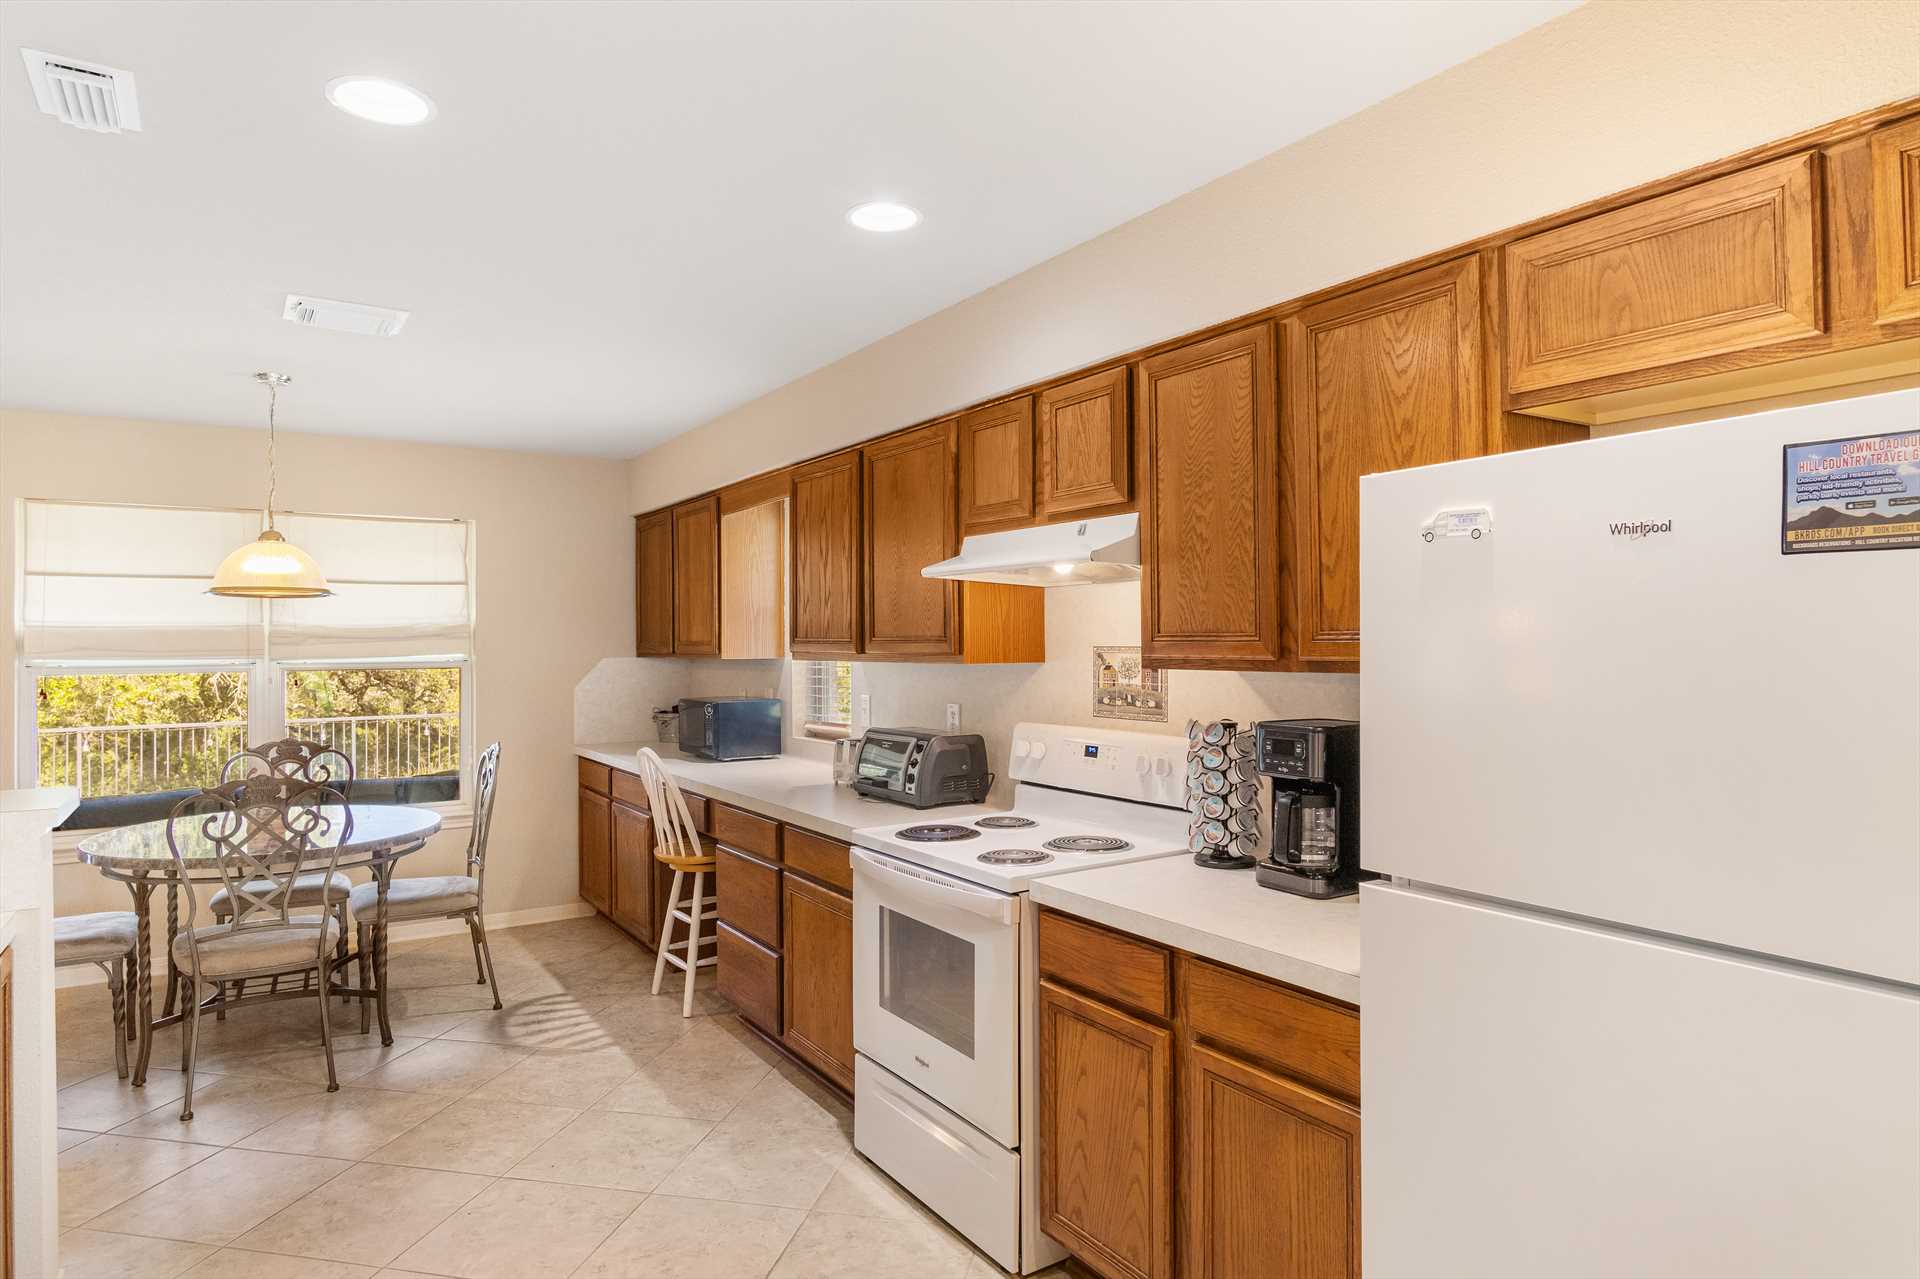                                                 The full kitchen features plenty of appliances, counter space, regular and Keurig coffee makers, and all the cooking and serving ware you'll need at mealtimes!